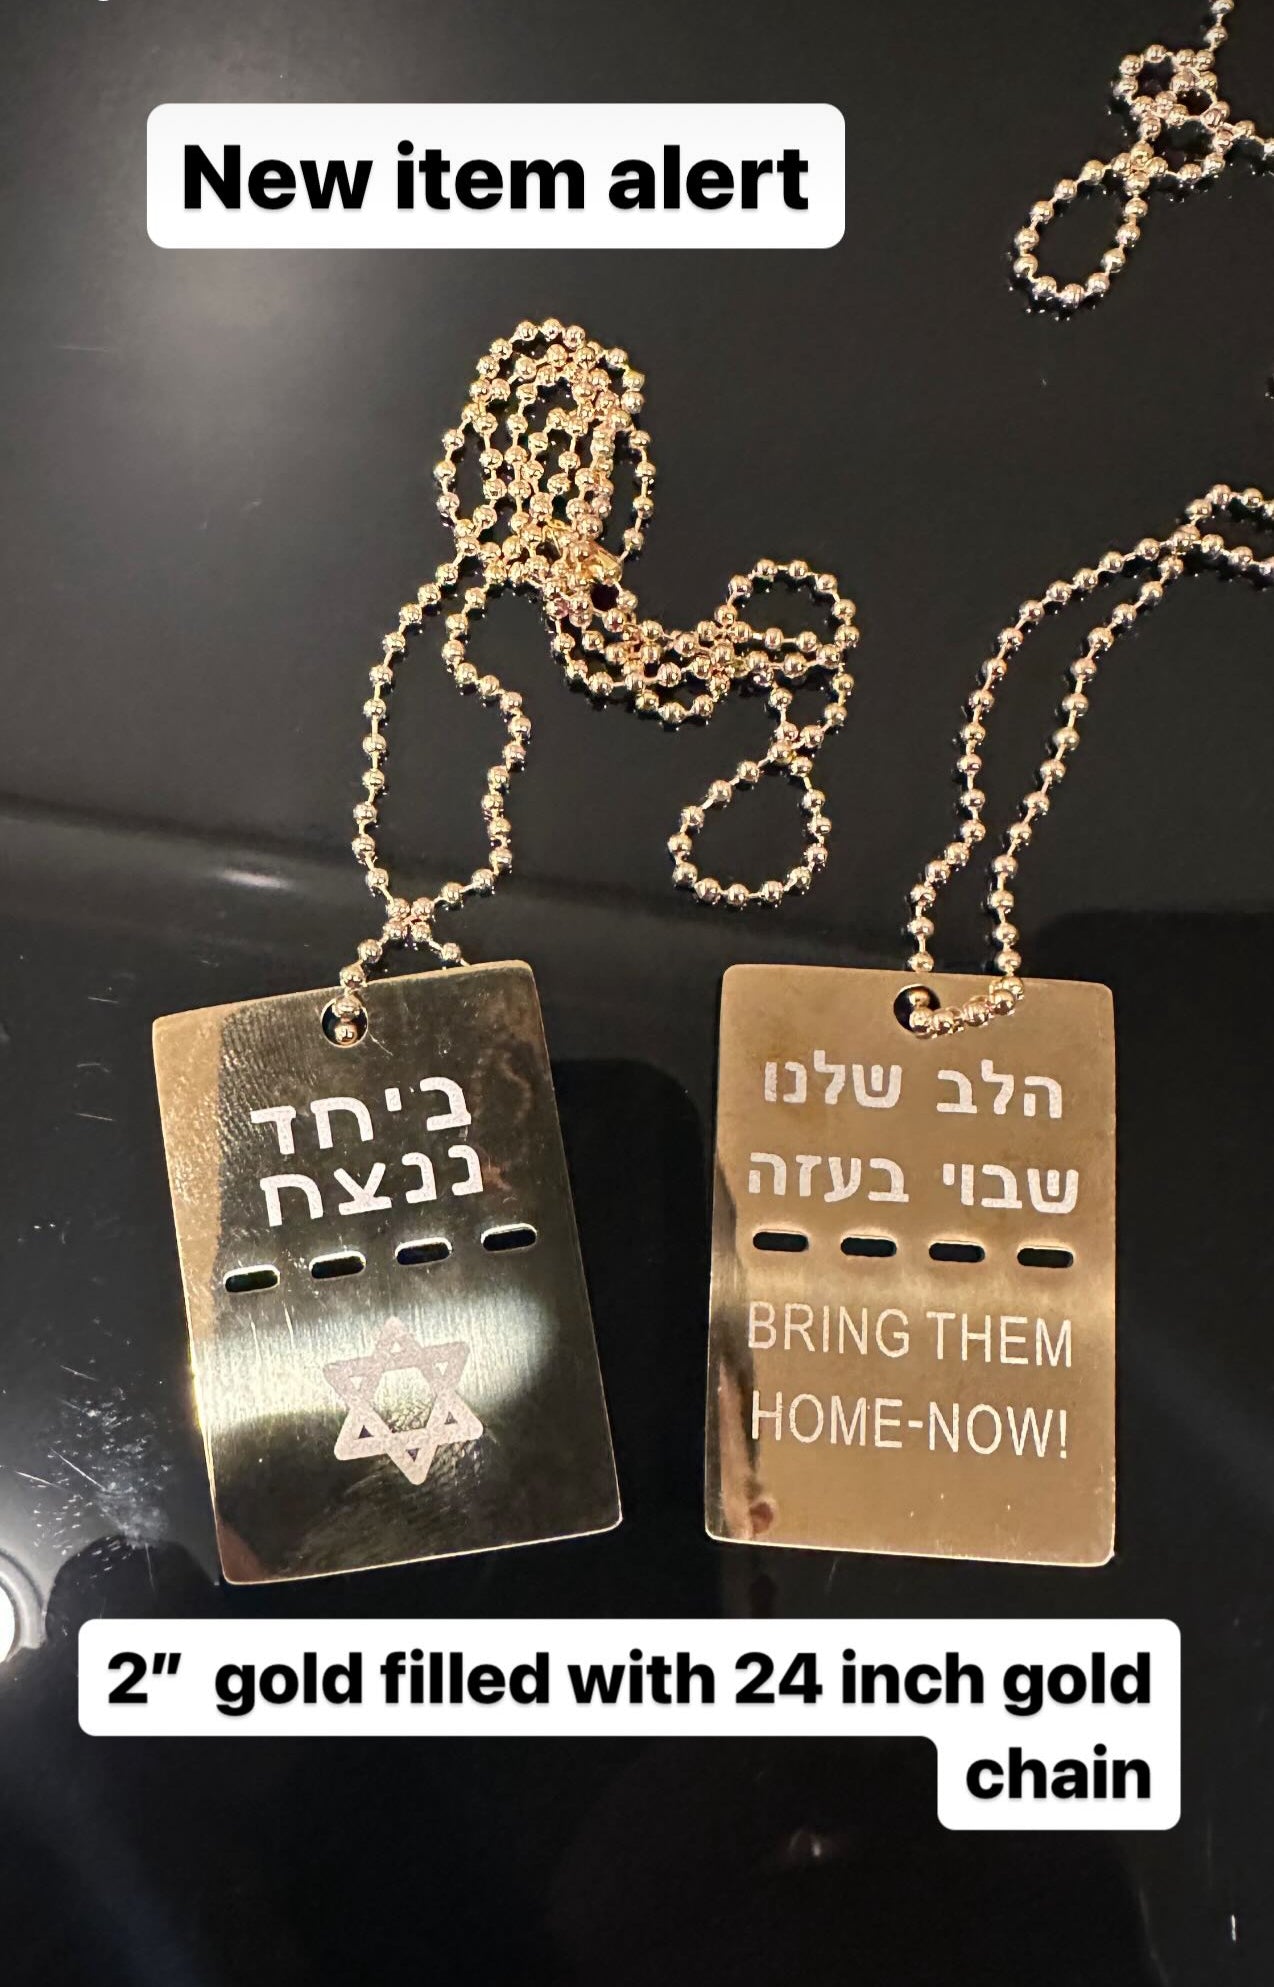 2 inch double sided dog tag hand maid in Israel with 24 inch chain 15% off today